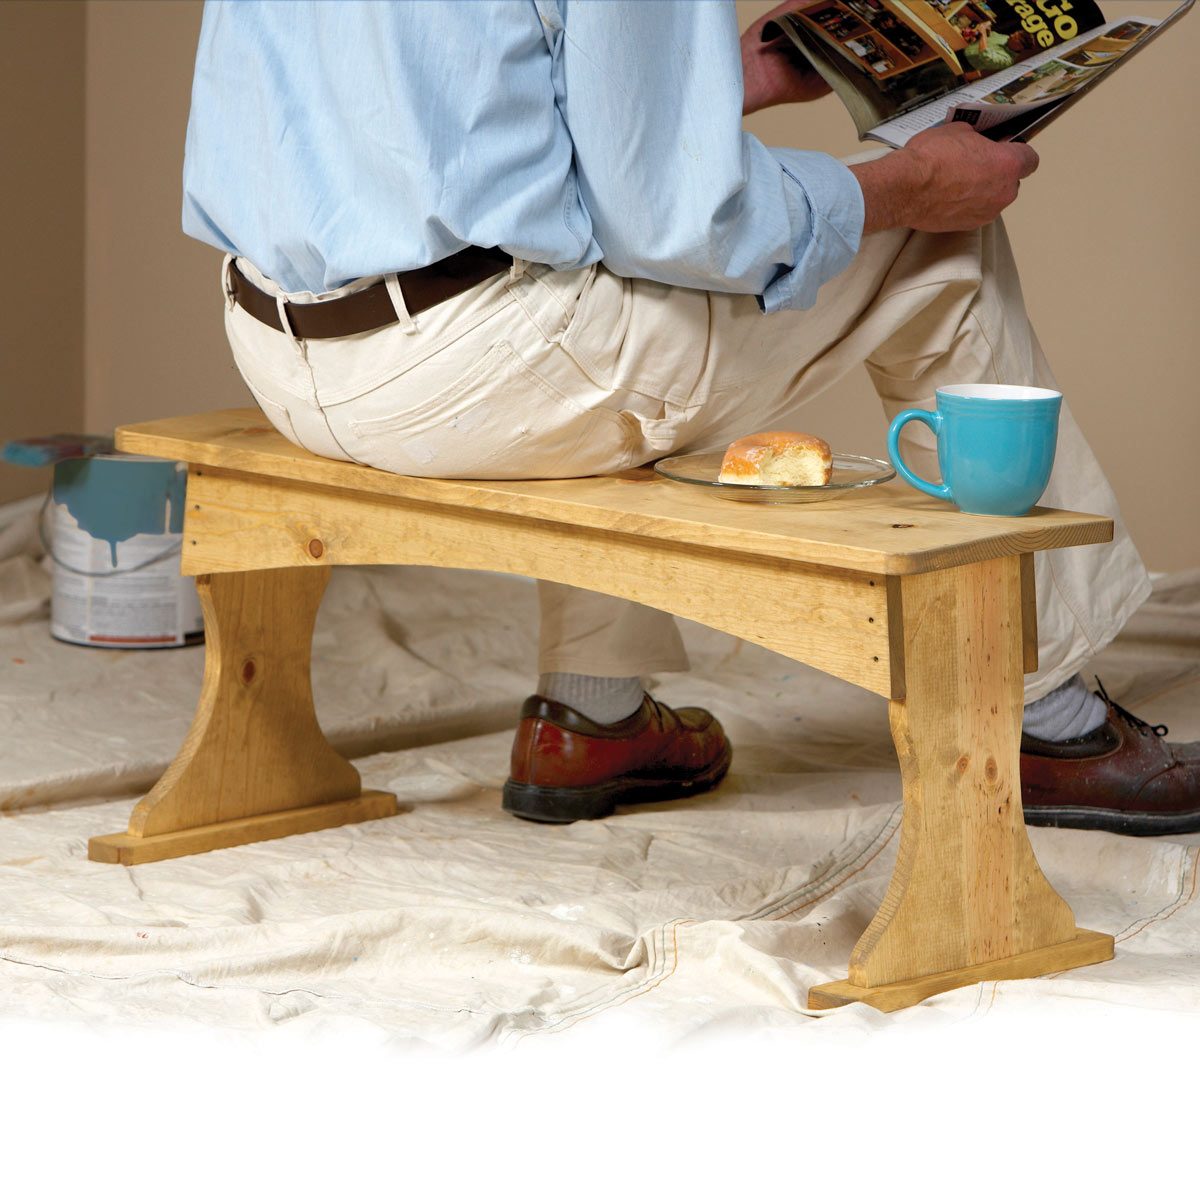 The Top 10 DIY Wood Projects — The Family Handyman